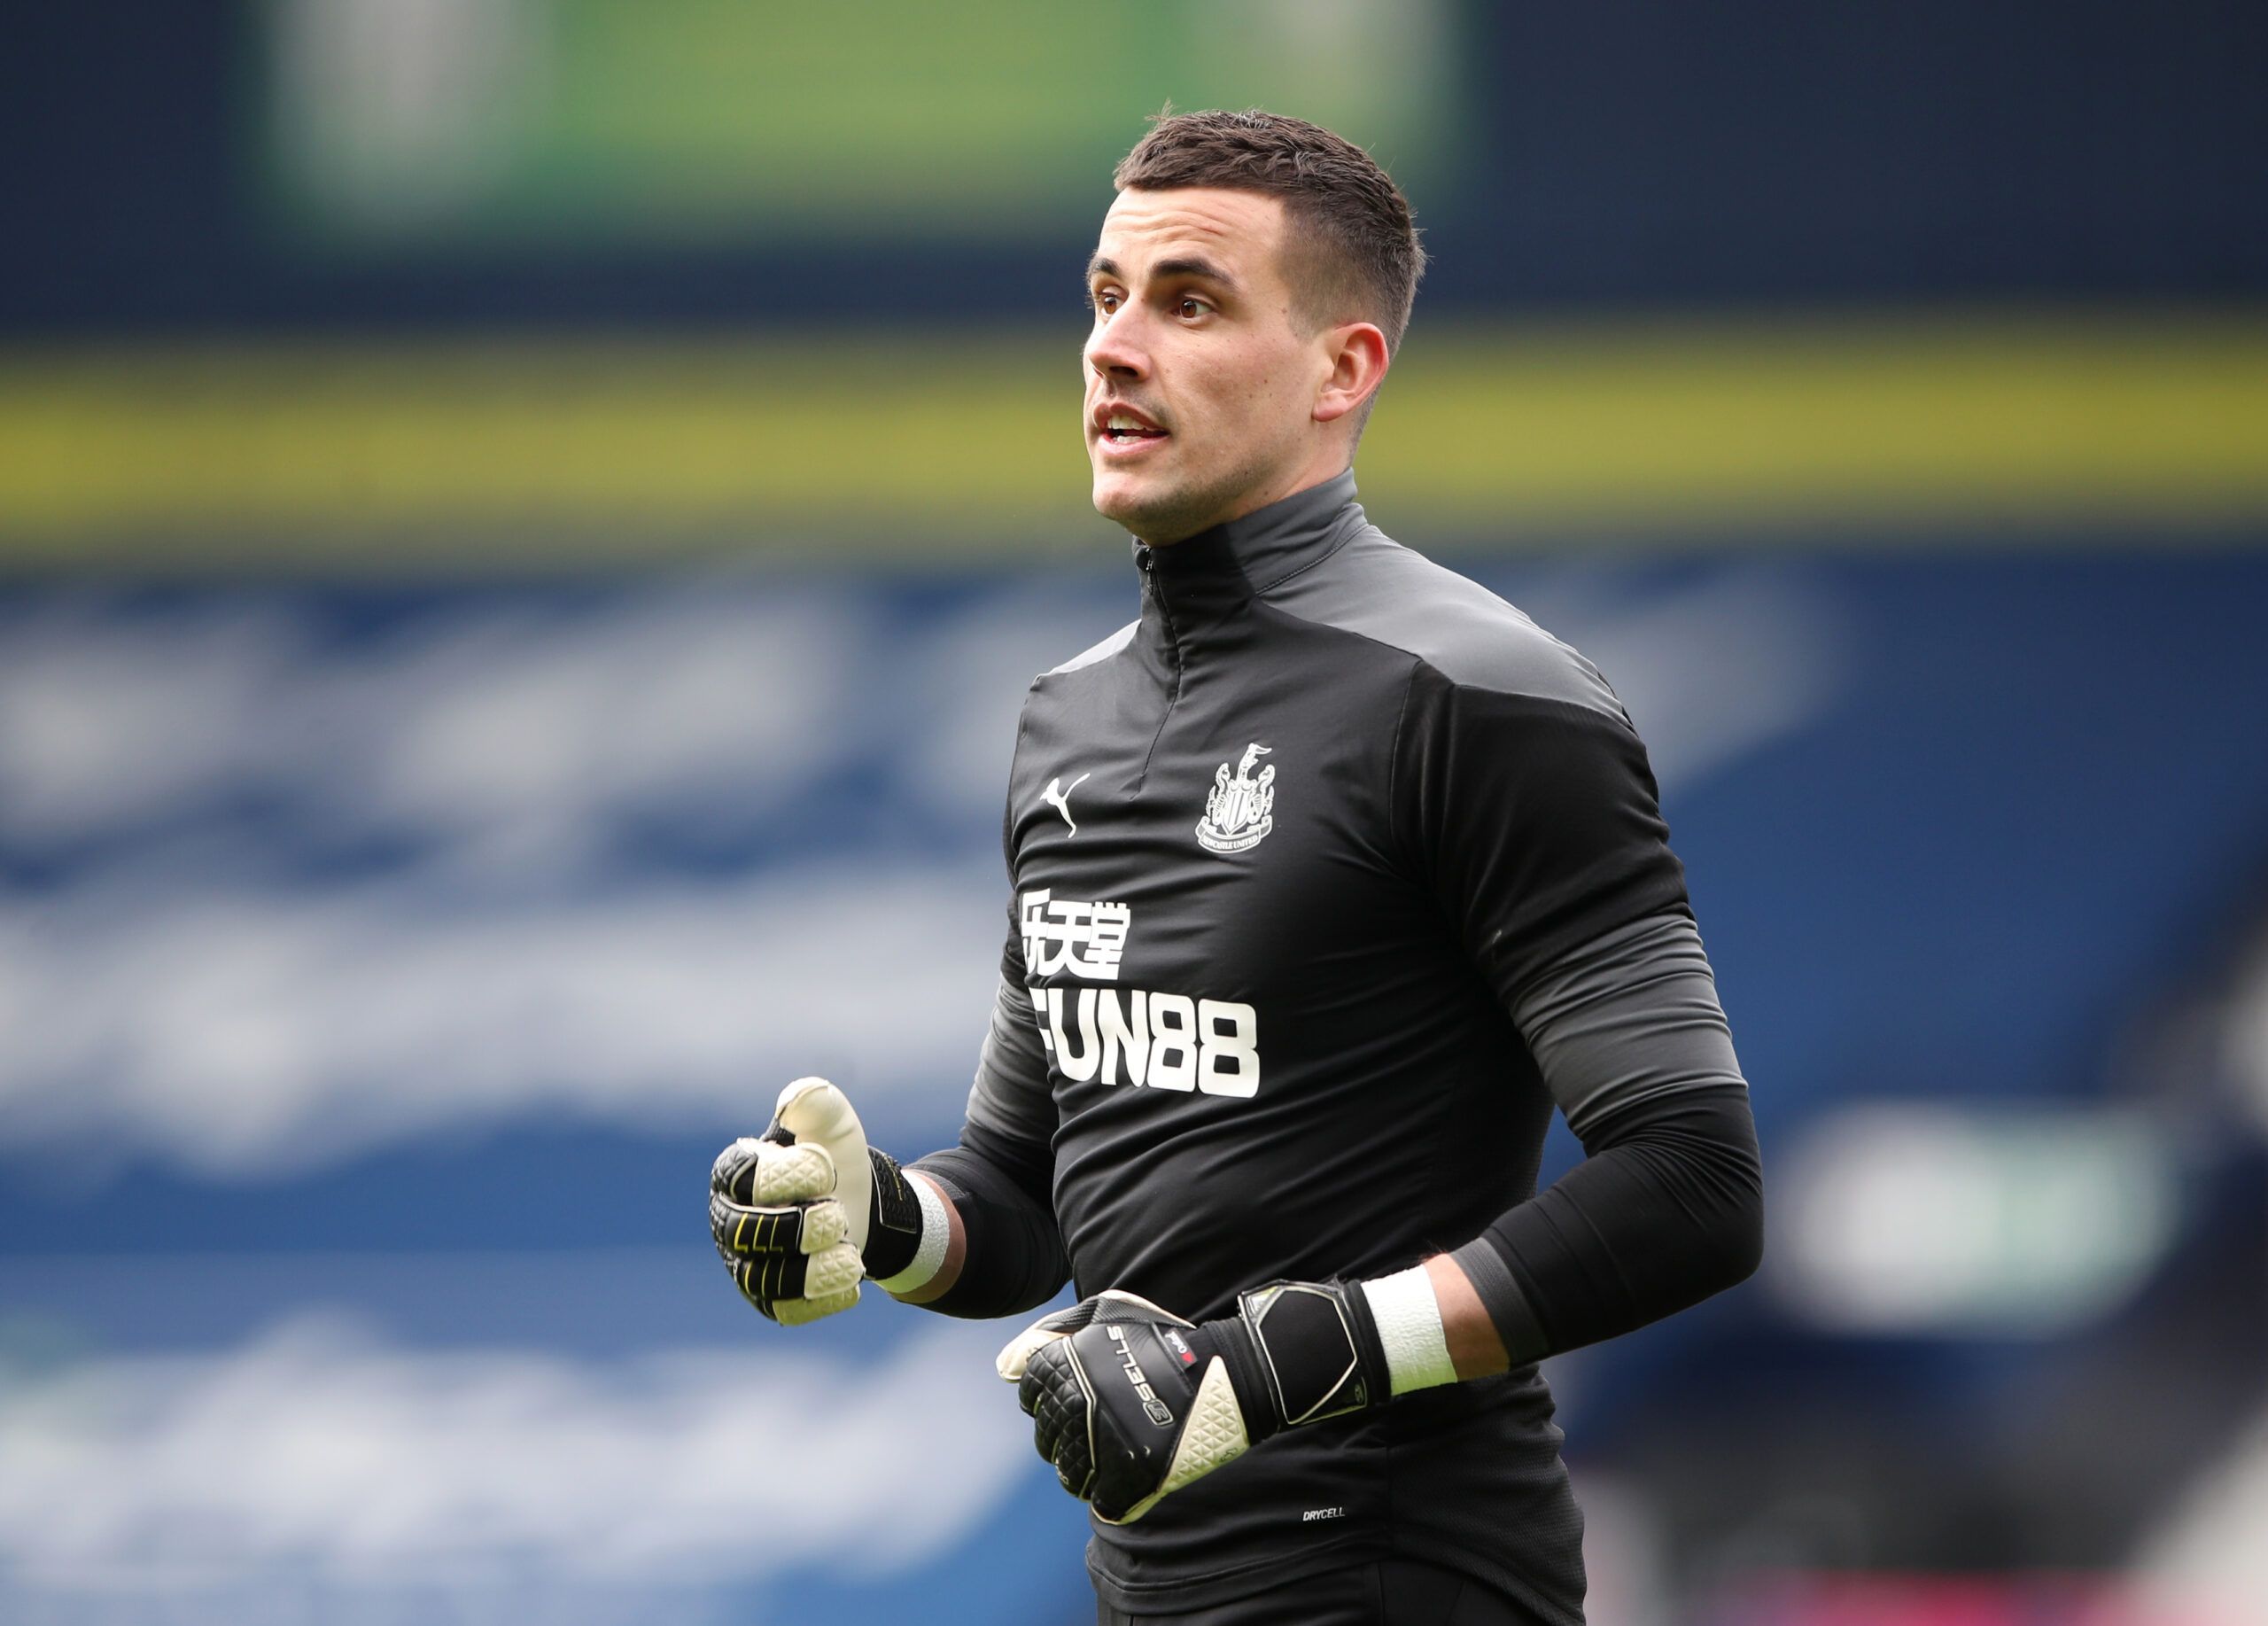 Soccer Football - Premier League - West Bromwich Albion v Newcastle United - The Hawthorns, West Bromwich, Britain - March 7, 2021 Newcastle United's Karl Darlow during the warm up before the match Pool via REUTERS/Nick Potts EDITORIAL USE ONLY. No use with unauthorized audio, video, data, fixture lists, club/league logos or 'live' services. Online in-match use limited to 75 images, no video emulation. No use in betting, games or single club /league/player publications.  Please contact your acco